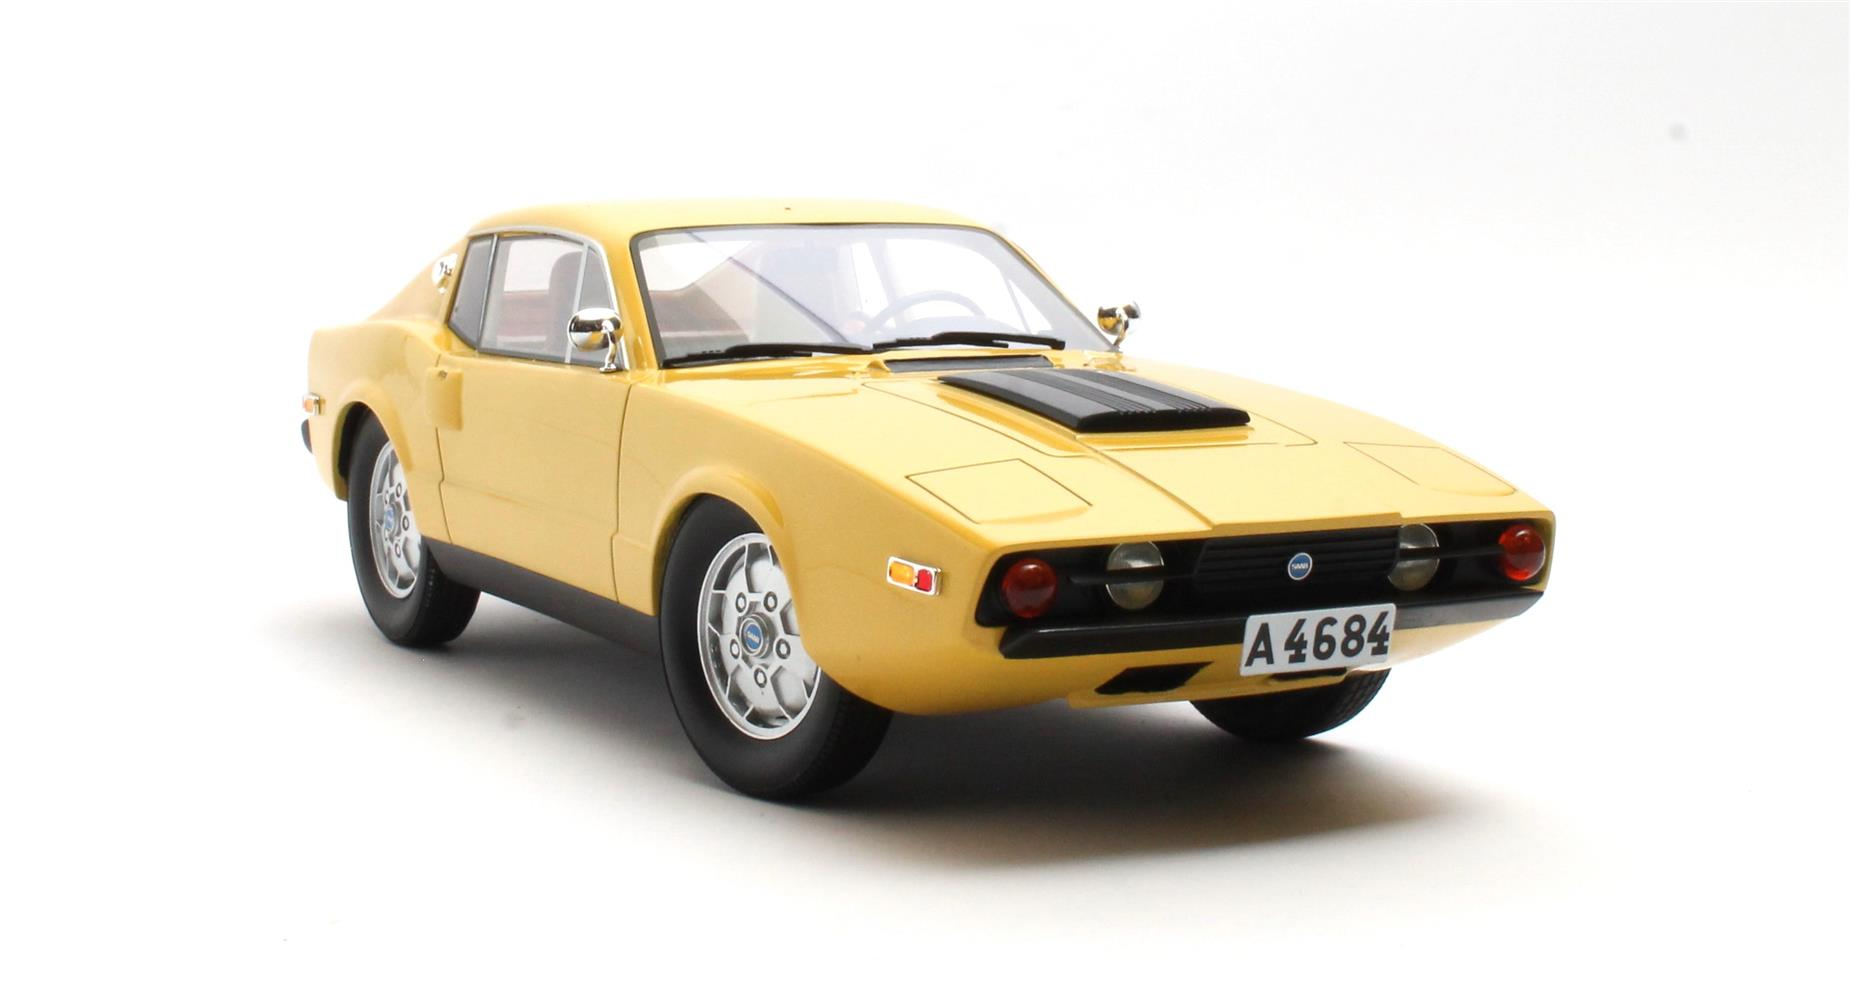 SAAB Sonnet III yellow 1972 1:18 Cult Scale Models